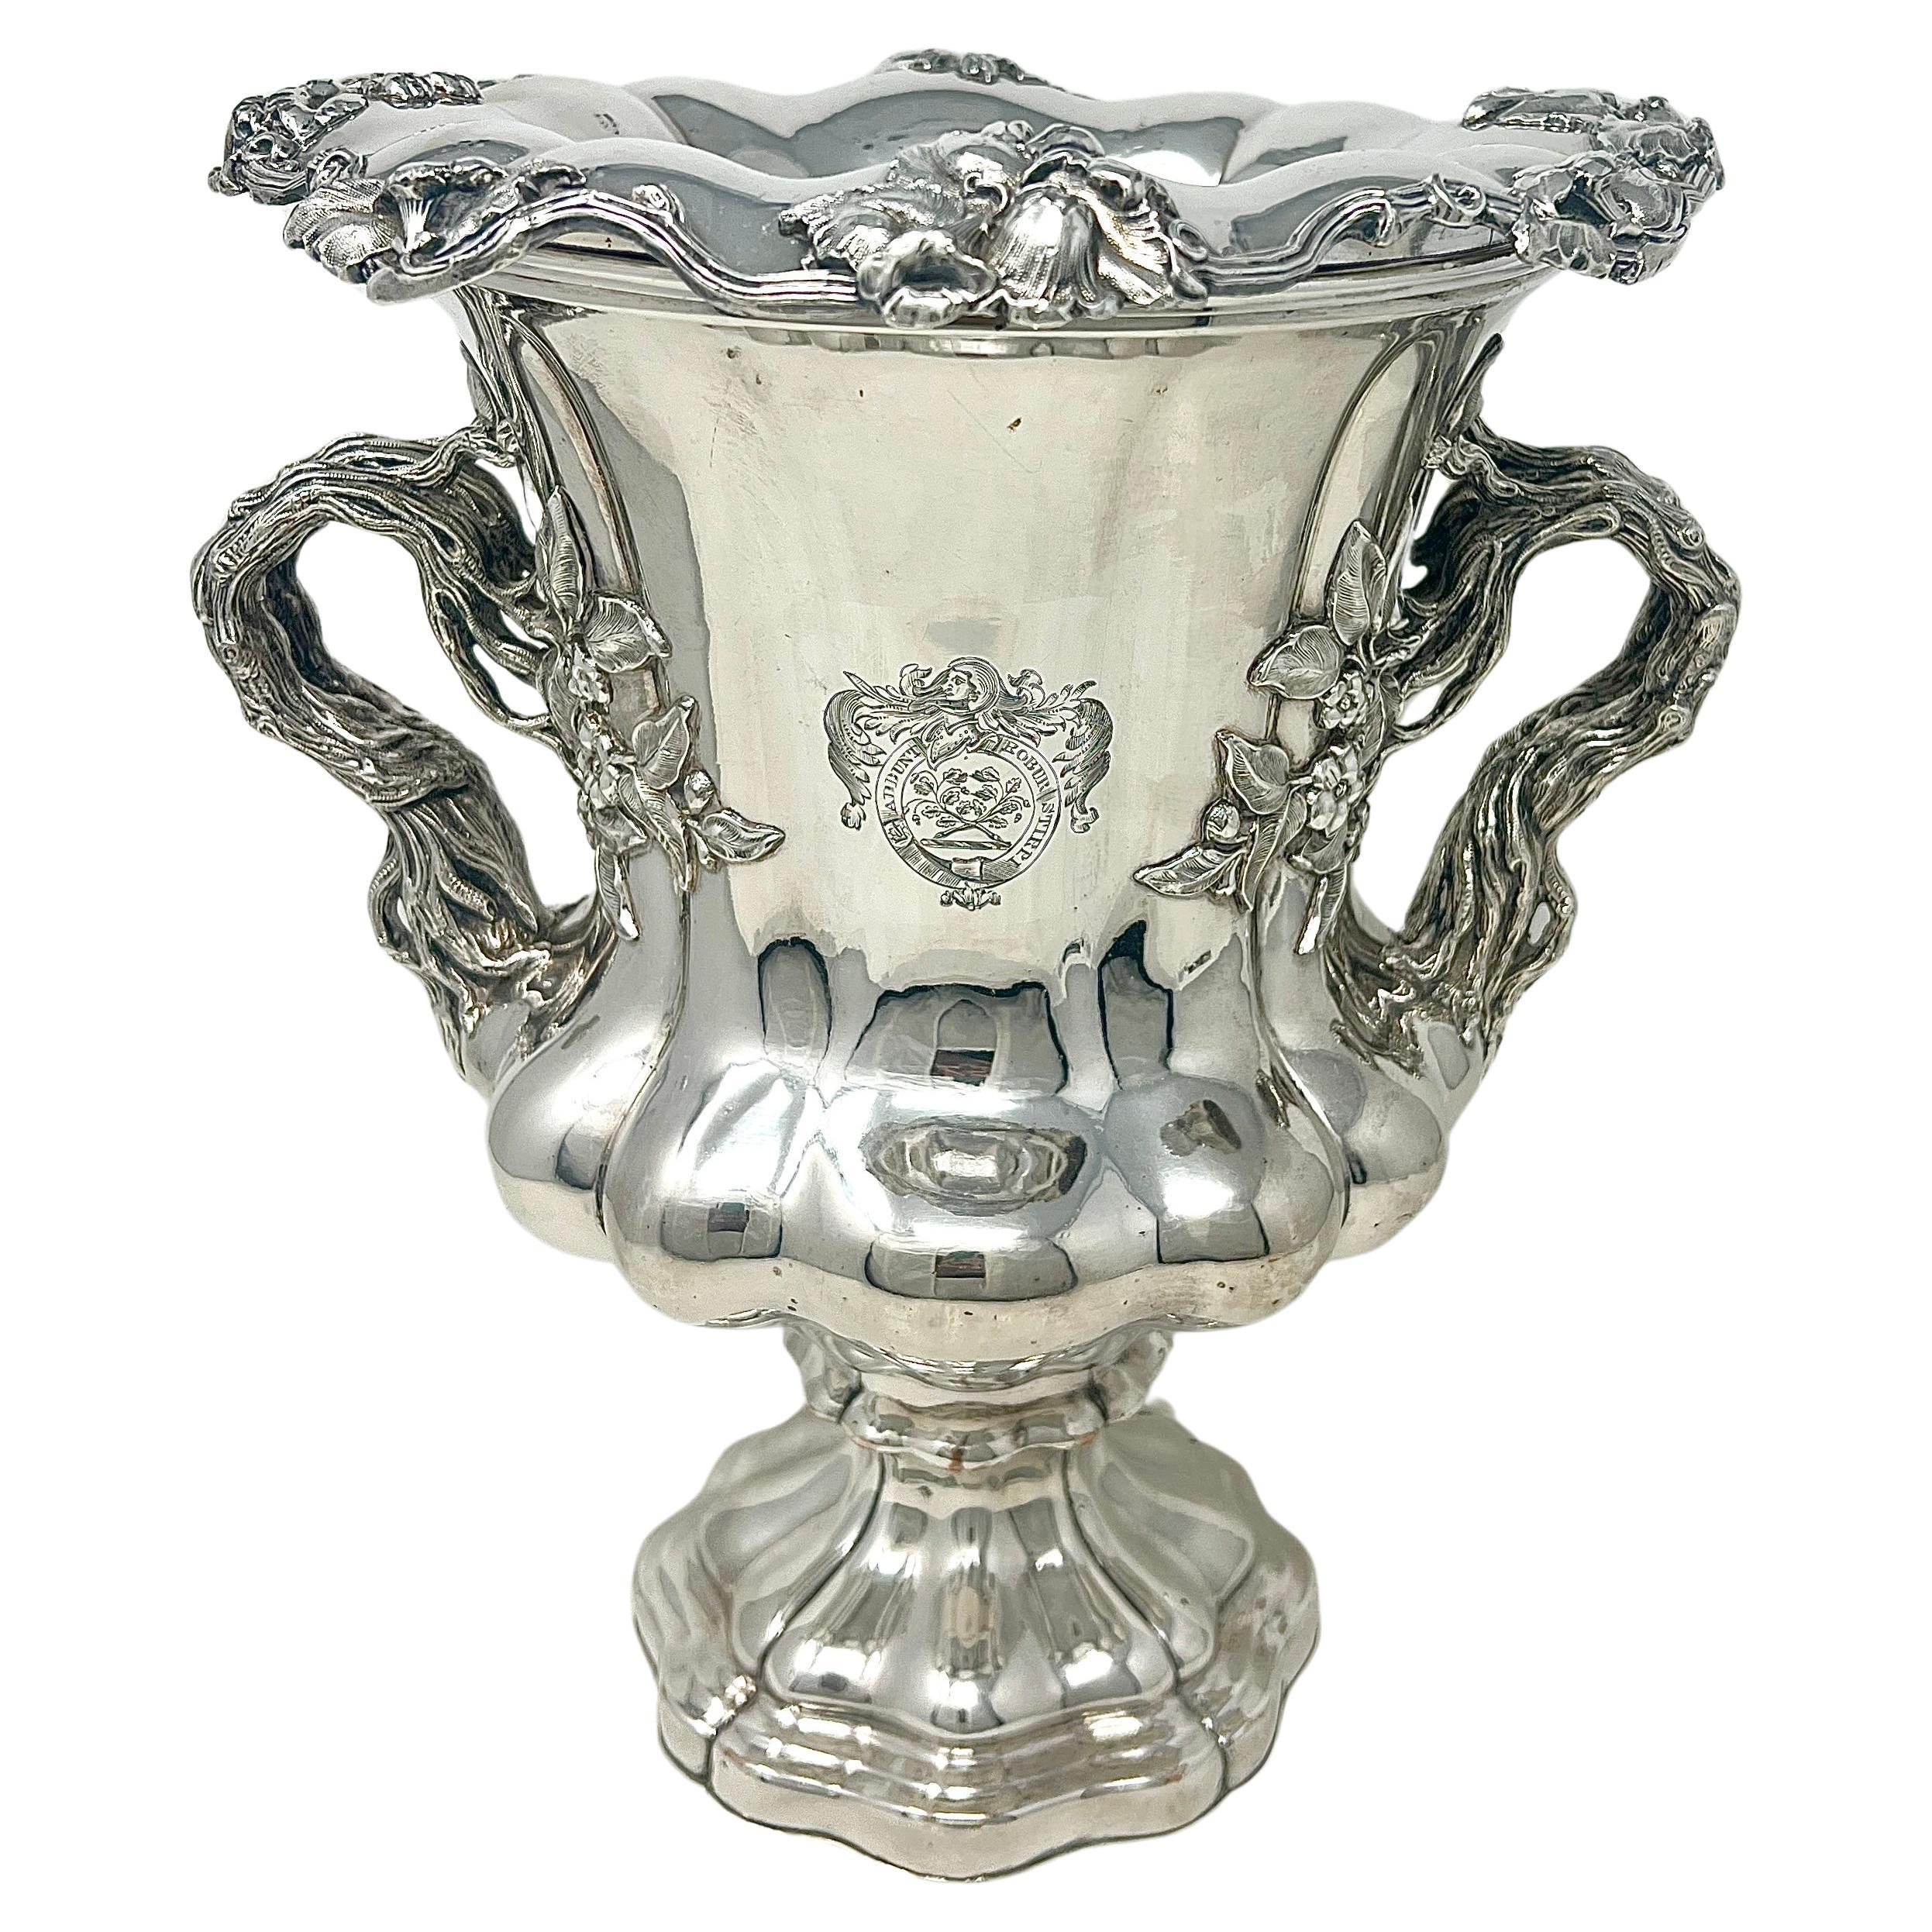 Antique English Silver Plated Champagne Bucket, Circa 1890-1900.